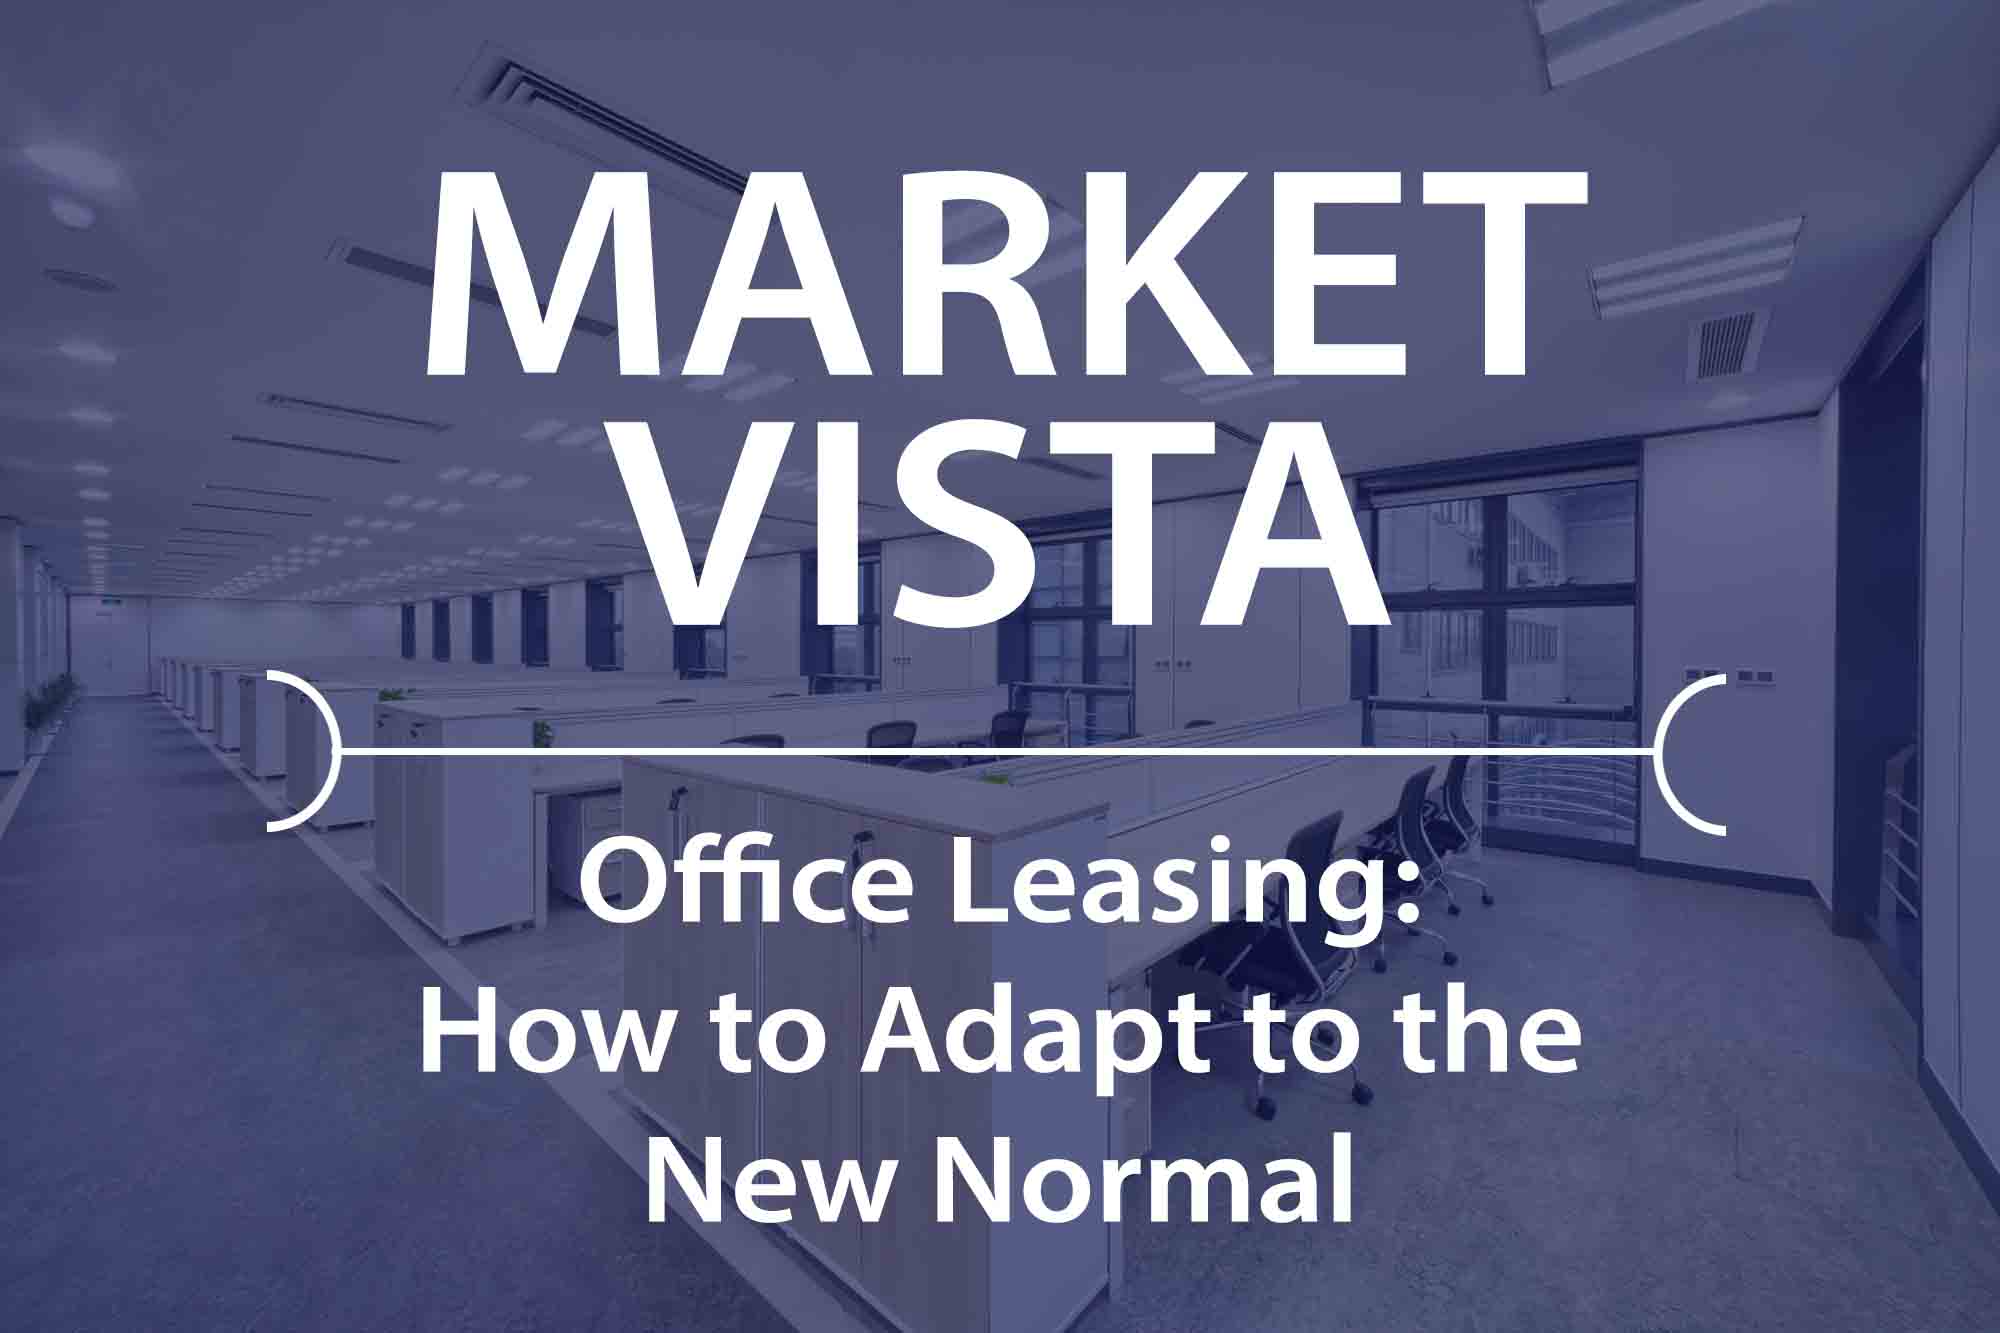 Office Leasing: How to Adapt to the New Normal